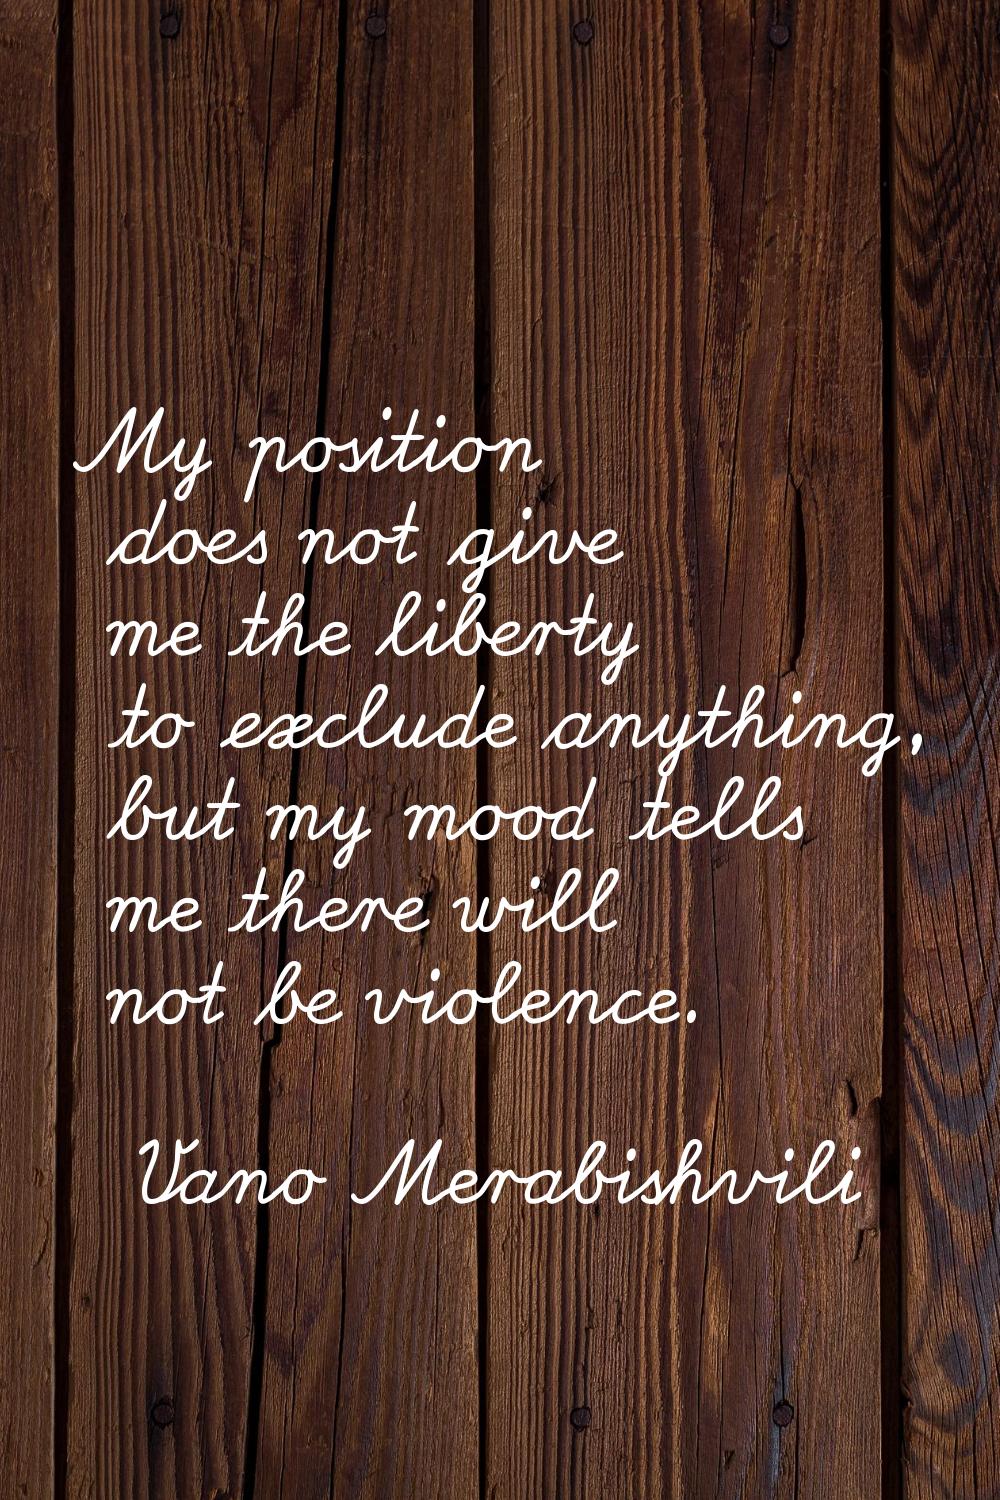 My position does not give me the liberty to exclude anything, but my mood tells me there will not b